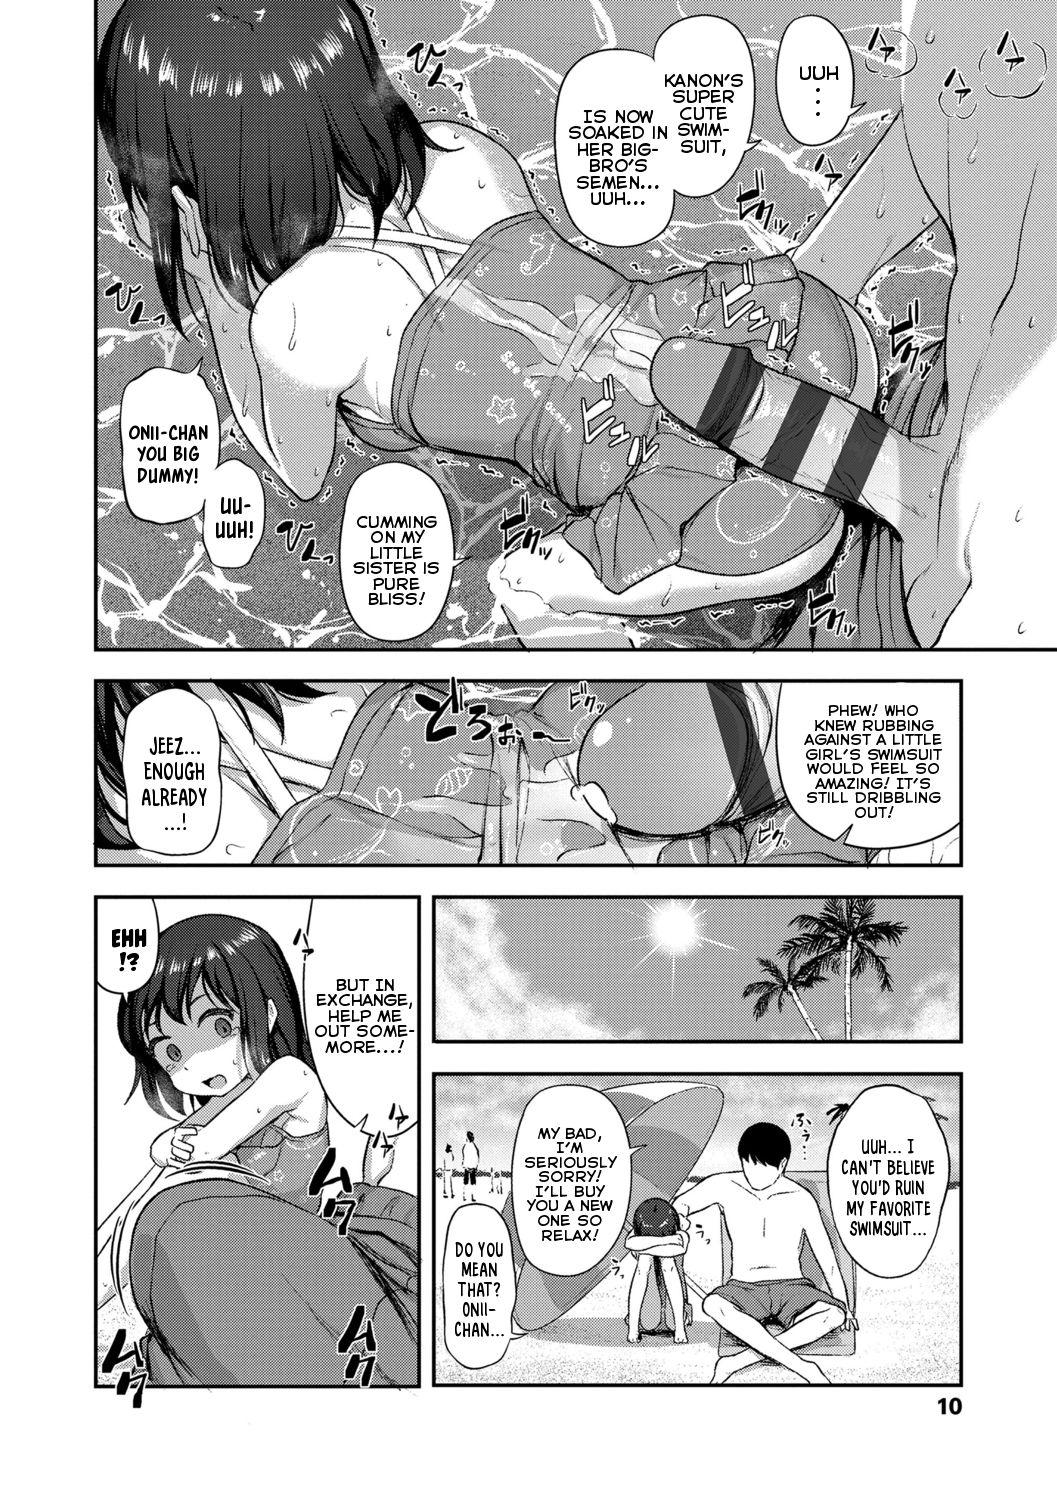 Free Rough Sex [Hayake] Imouto no Hadaka o Mite Koufun Suru nante Hen na Onii-chan | What Kind of Weirdo Onii-chan Gets Excited From Seeing His Little Sister Naked? [English] [Mistvern + Shippoyasha] [Digital] Gloryhole - Page 12